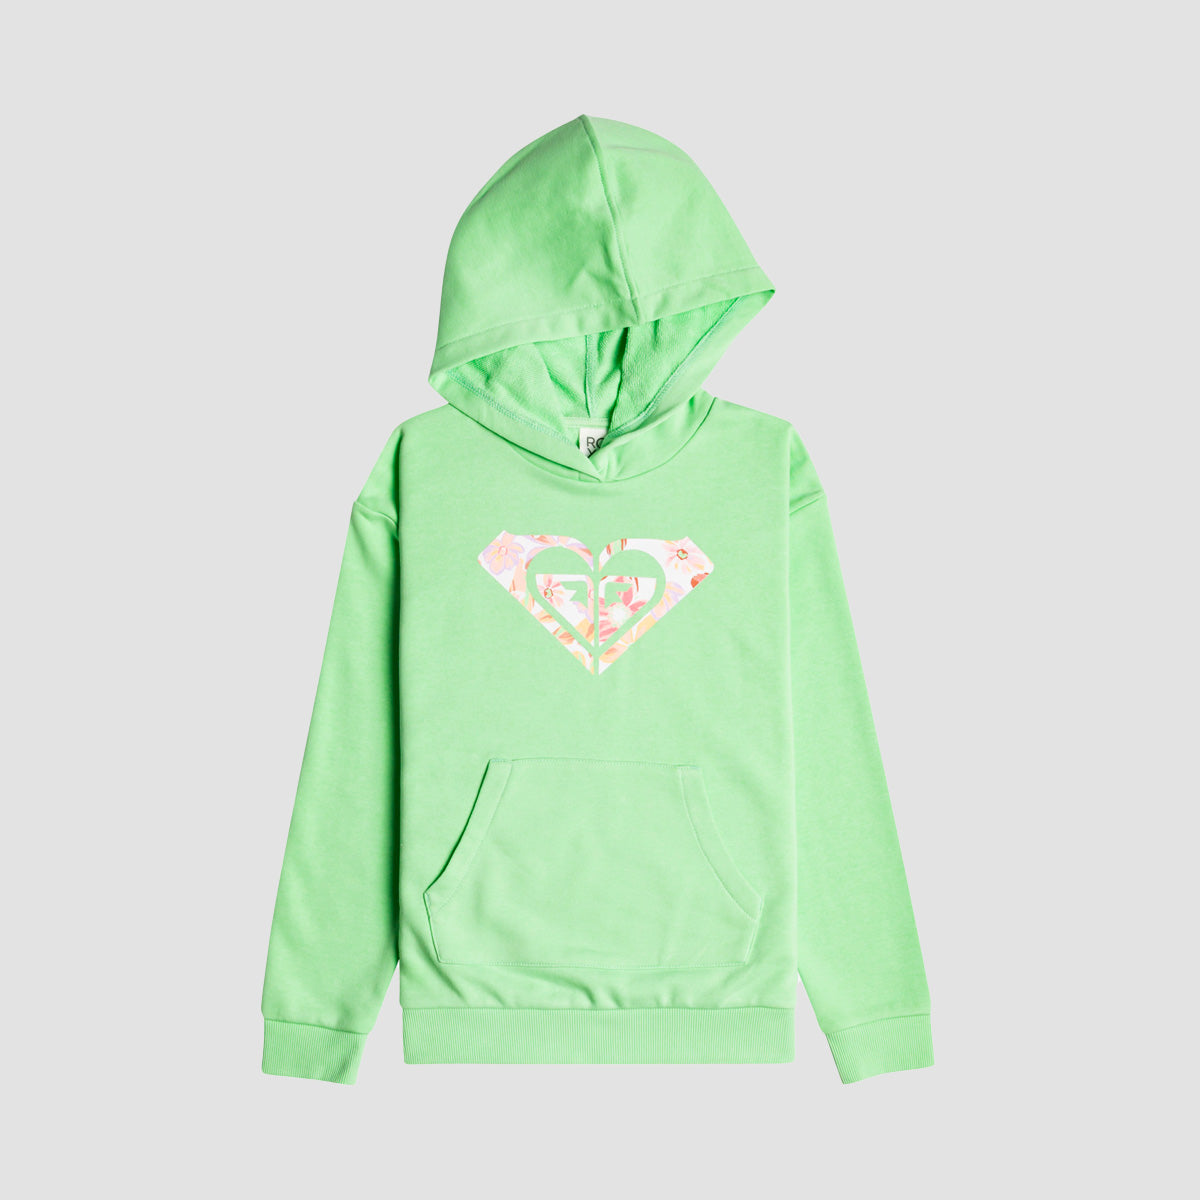 Roxy Happiness Forever Pullover Hoodie Pistachio Green - Girls